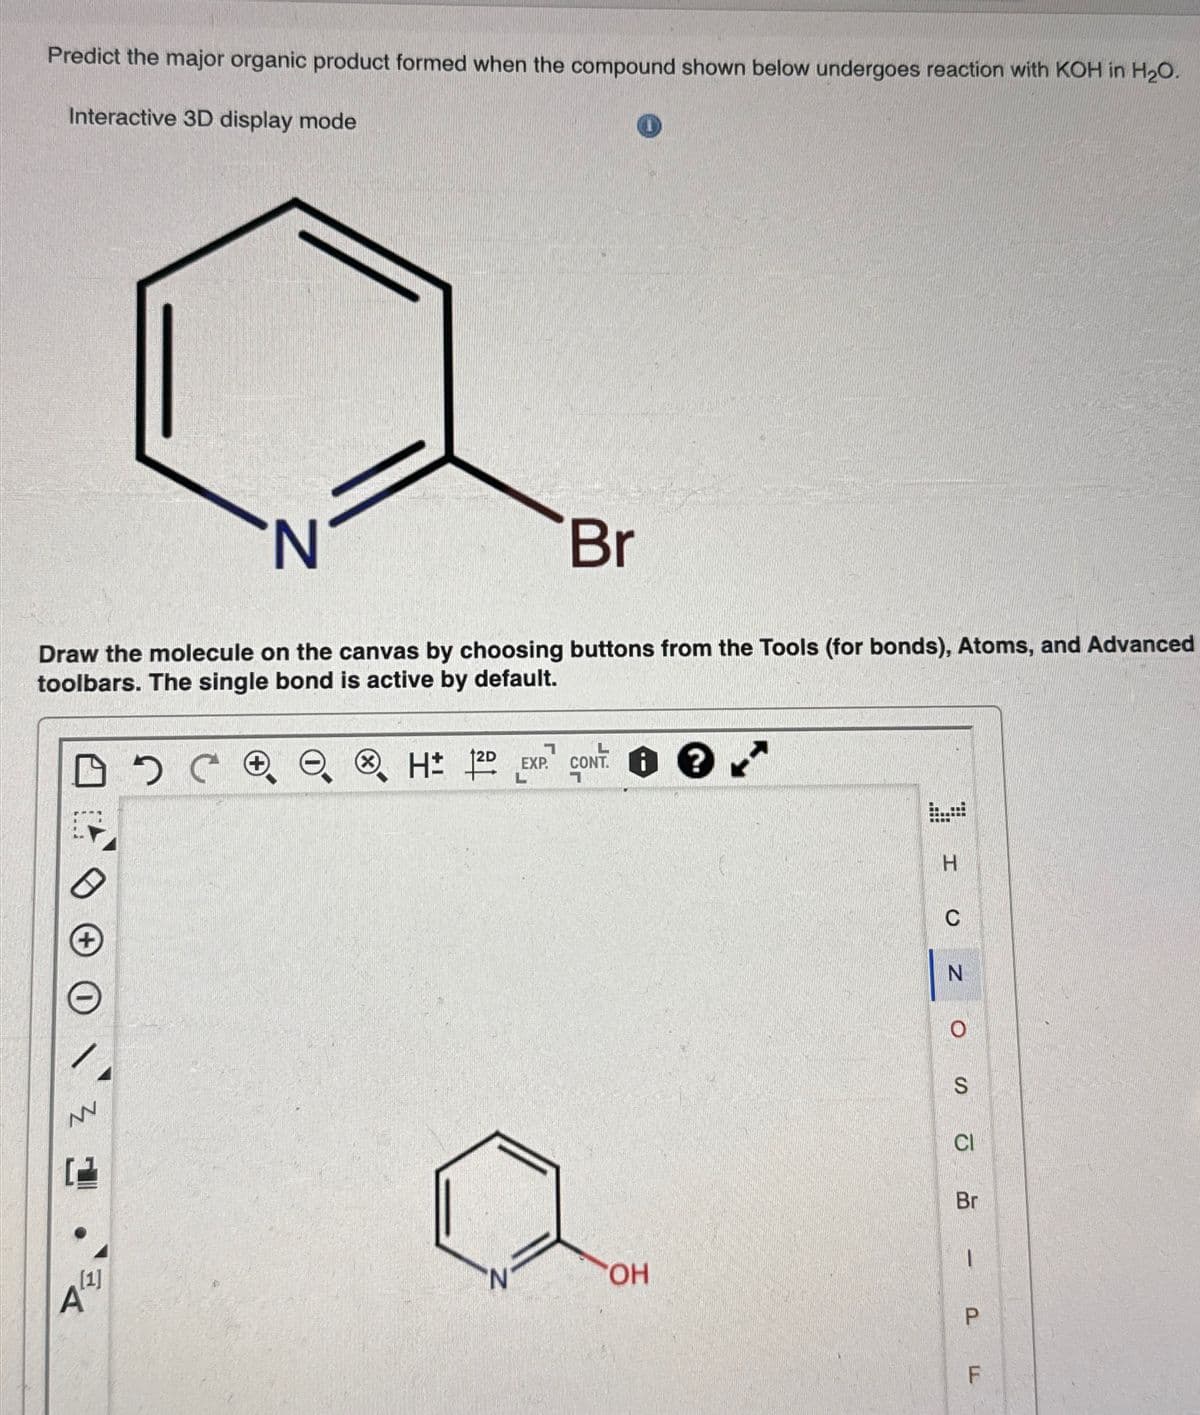 Predict the major organic product formed when the compound shown below undergoes reaction with KOH in H2O.
Interactive 3D display mode
N
Br
Draw the molecule on the canvas by choosing buttons from the Tools (for bonds), Atoms, and Advanced
toolbars. The single bond is active by default.
+
Z
A
[1]
Ⓡ H± 12D
EXP. C
CONT
H
C
N
S
CI
Br
N'
OH
P
பட
F